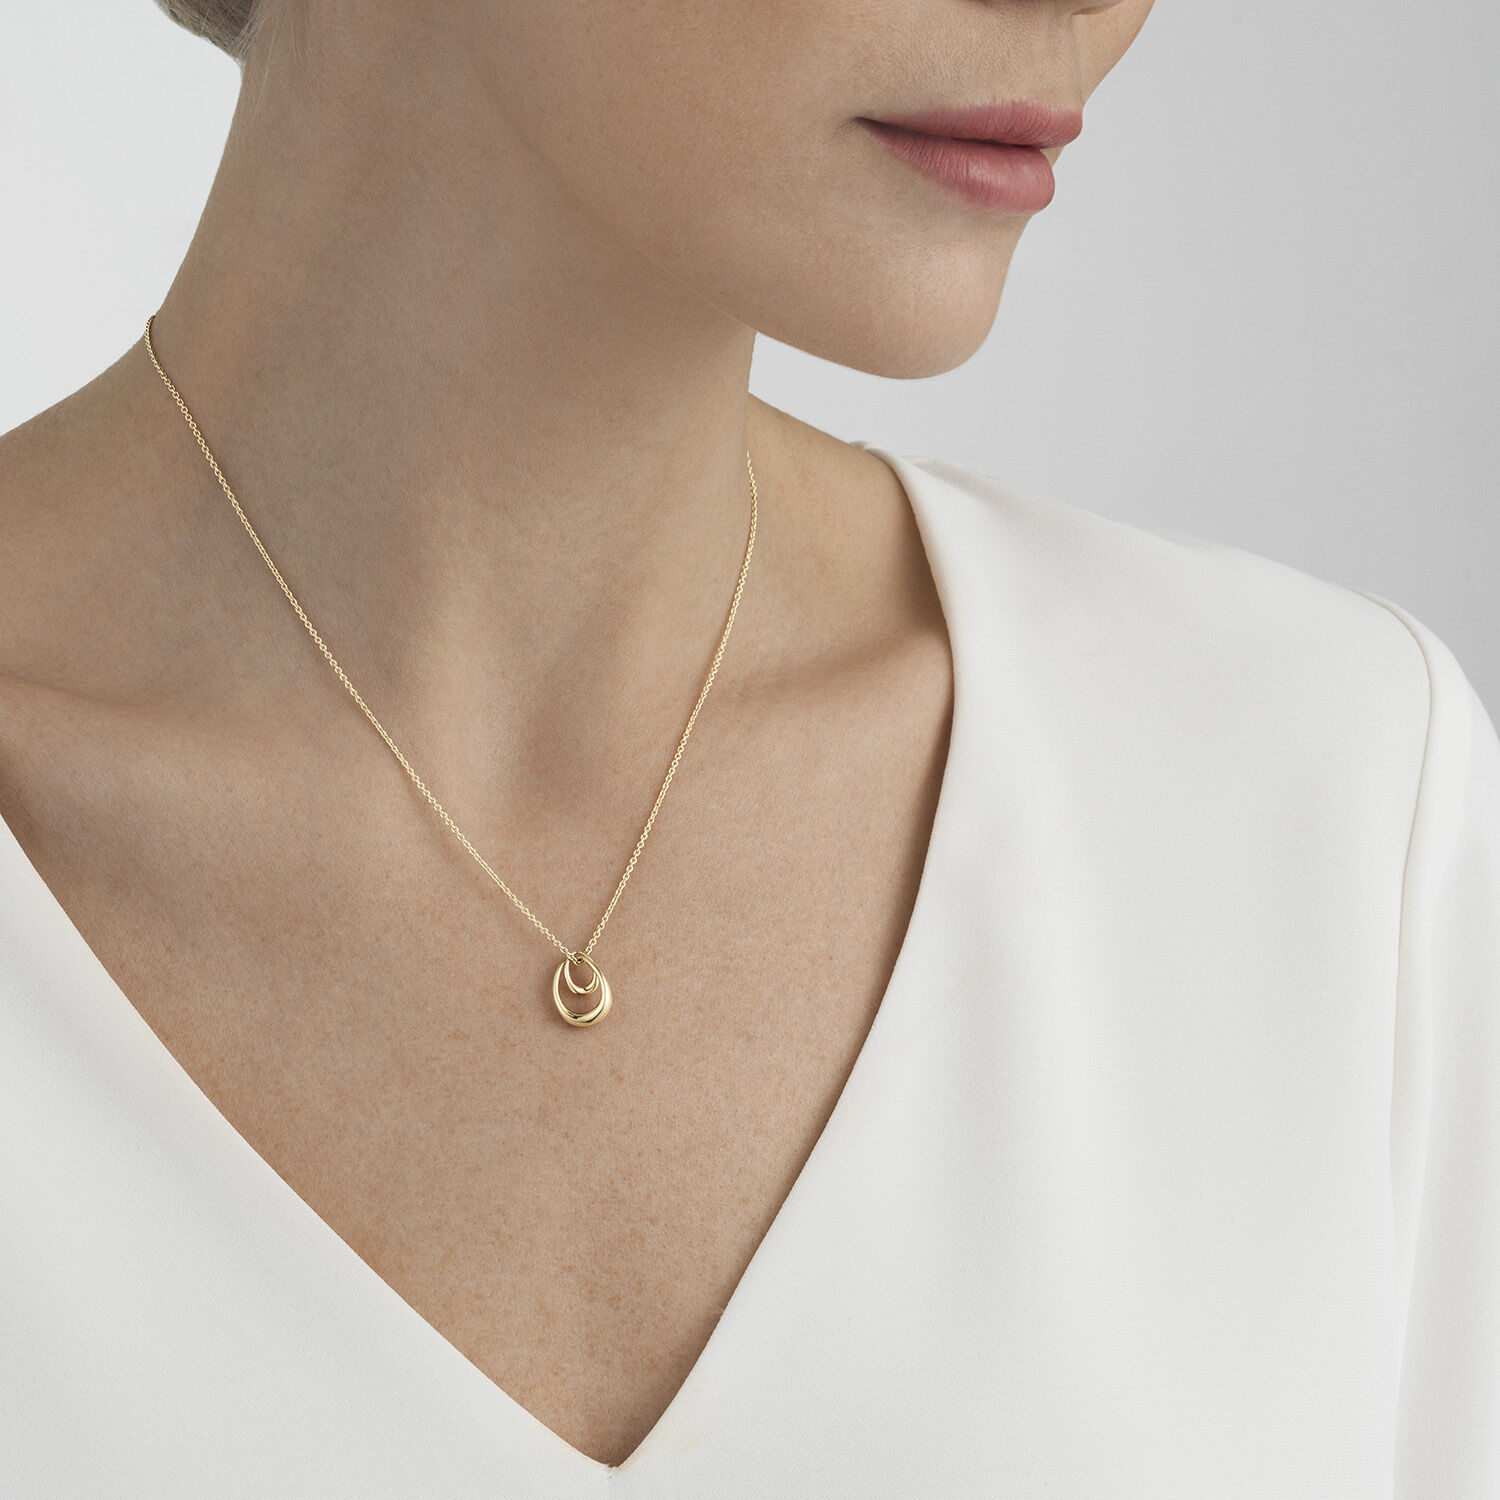 OFFSPRING pendant, mother daughter necklace in 18k gold